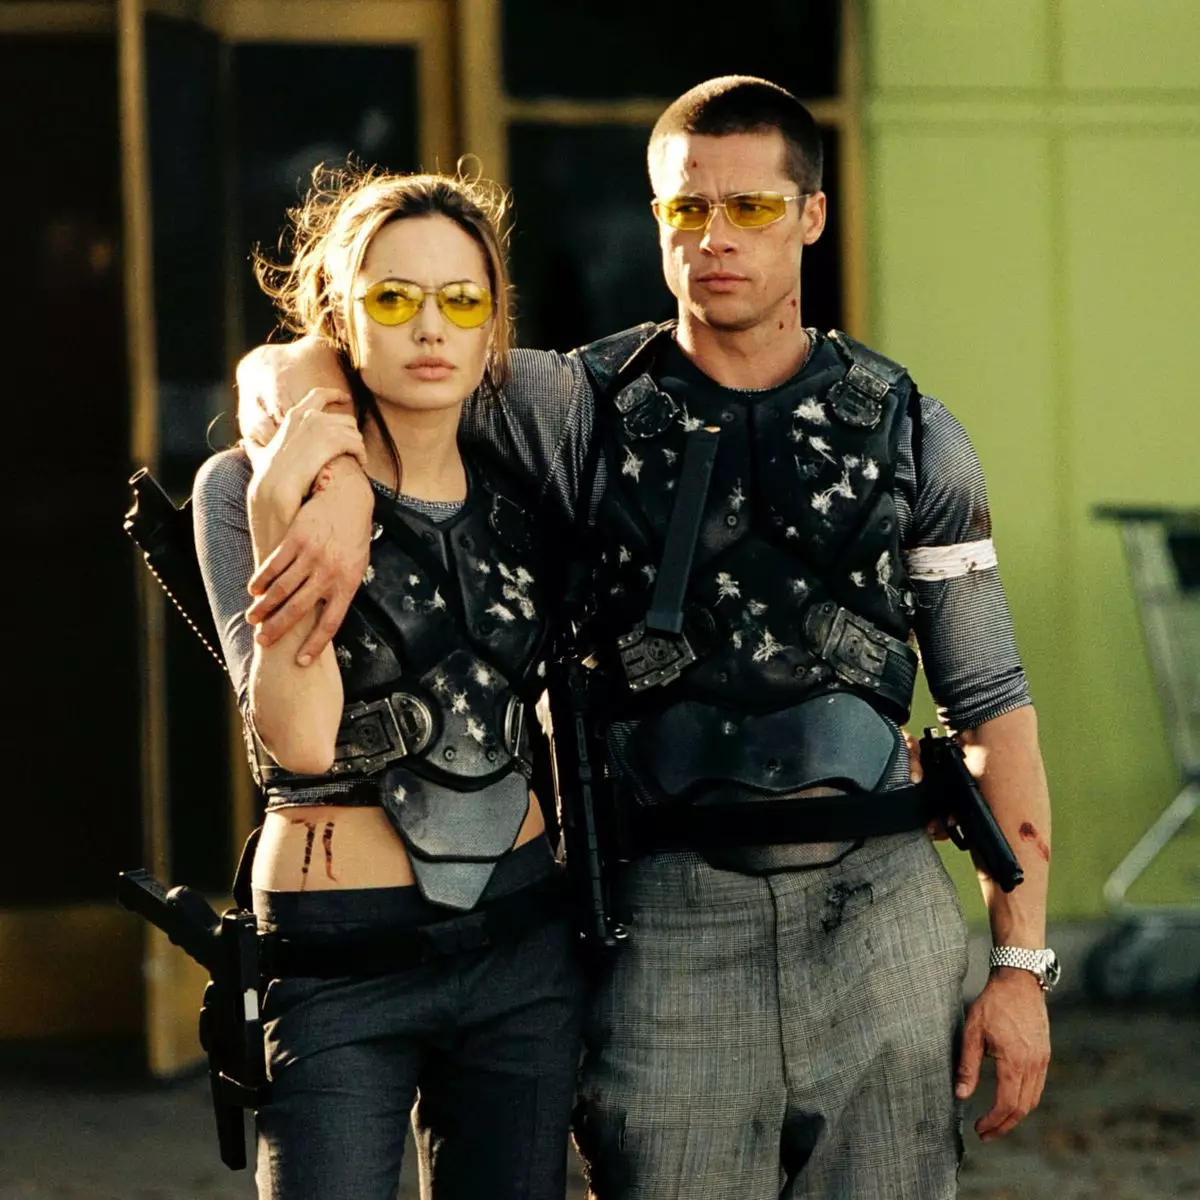 Brad Pitt and Angelina Jolie starred in Mr. & Mrs Smith in 2005 (